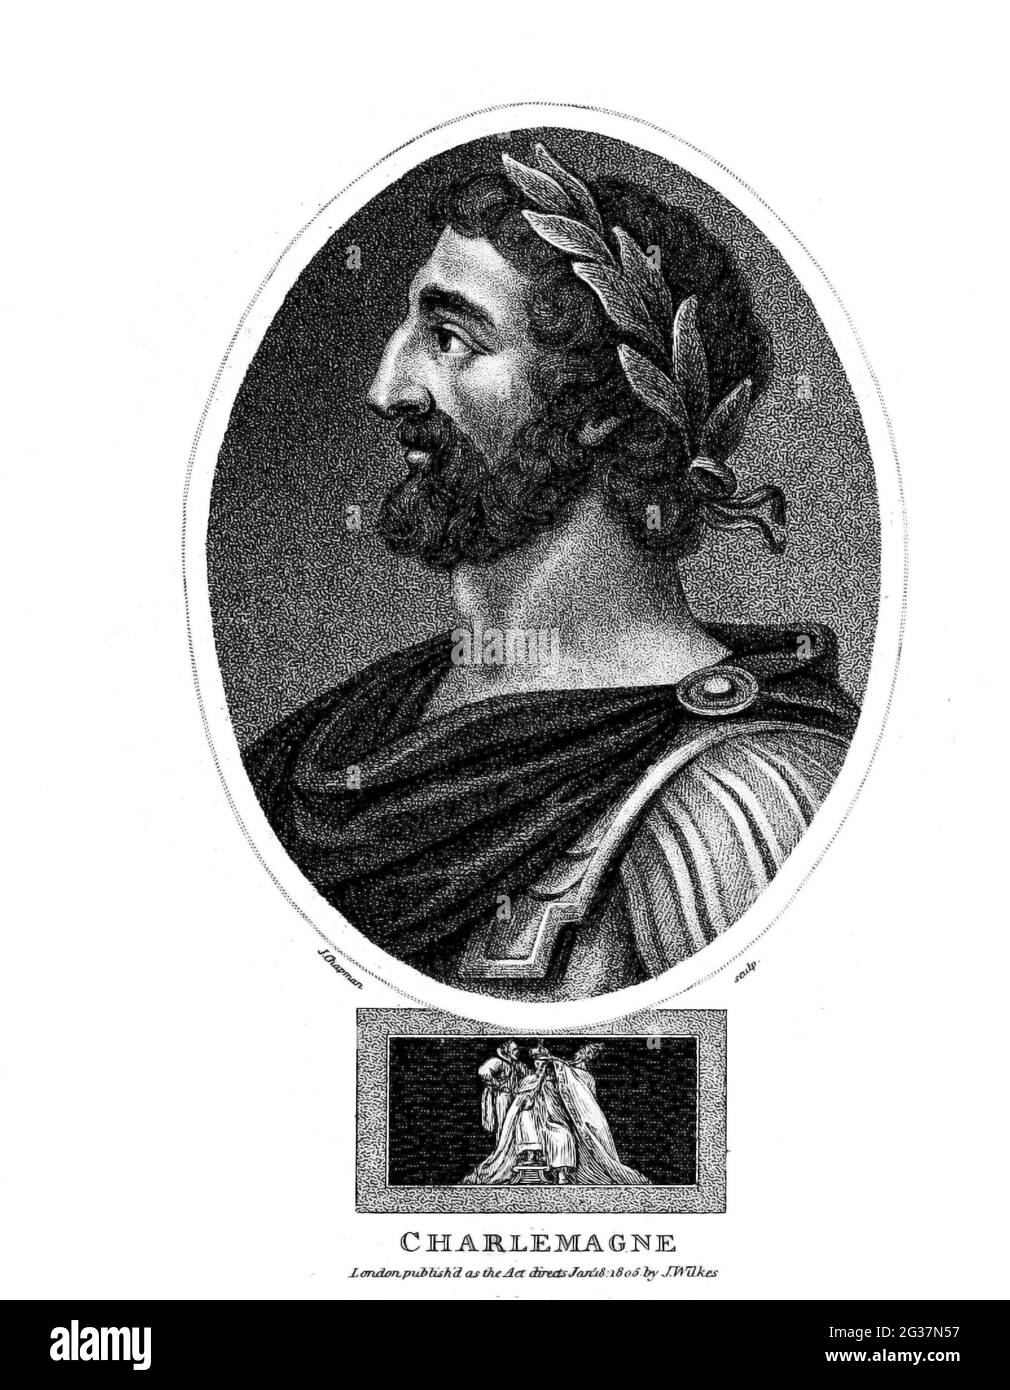 Charlemagne (Charles the Great; 2 April 748 – 28 January 814), numbered Charles I, was King of the Franks from 768, King of the Lombards from 774, and Emperor of the Romans from 800. During the Early Middle Ages, he united the majority of western and central Europe. Copperplate engraving From the Encyclopaedia Londinensis or, Universal dictionary of arts, sciences, and literature; Volume VII;  Edited by Wilkes, John. Published in London in 1810 Stock Photo